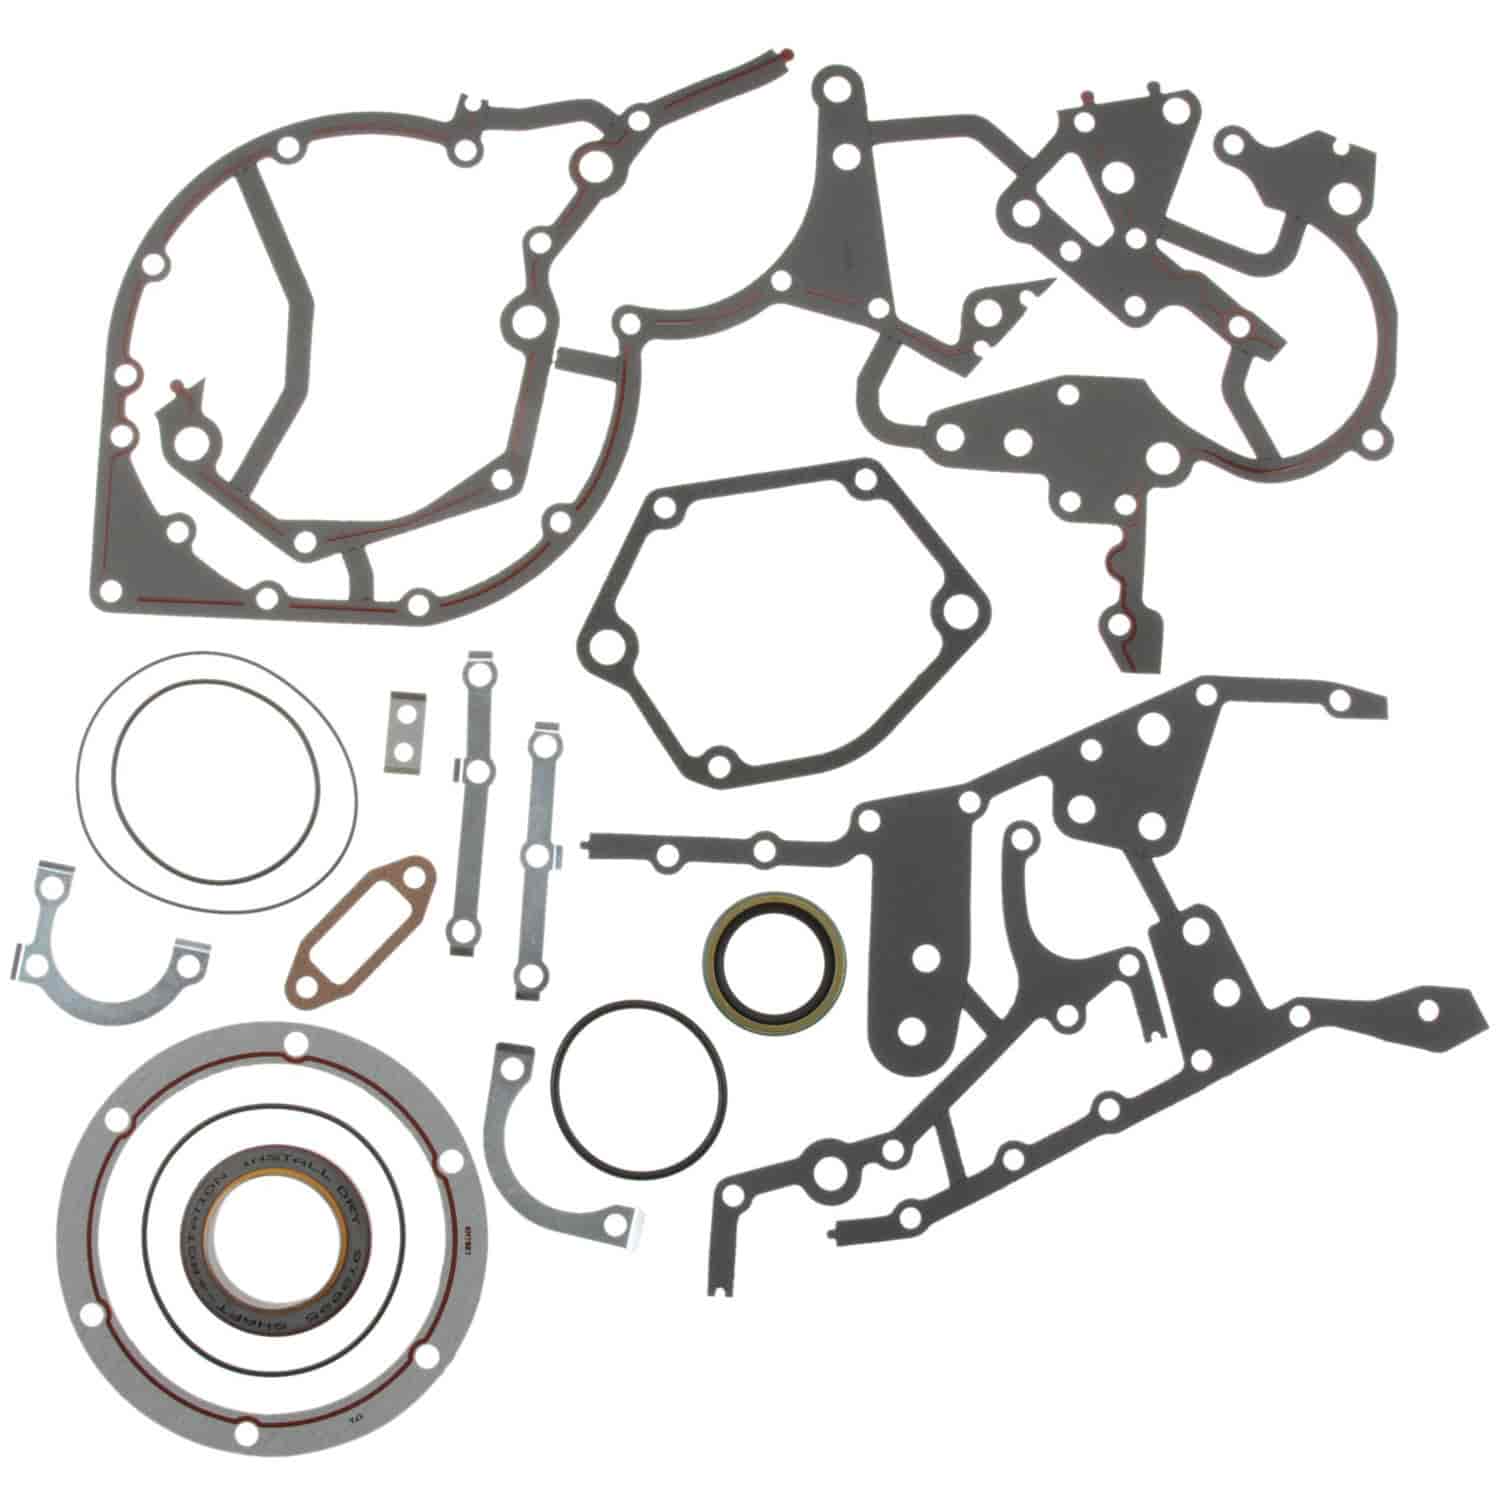 Timing Cover Set Caterpillar 3306 and 3304 Engines